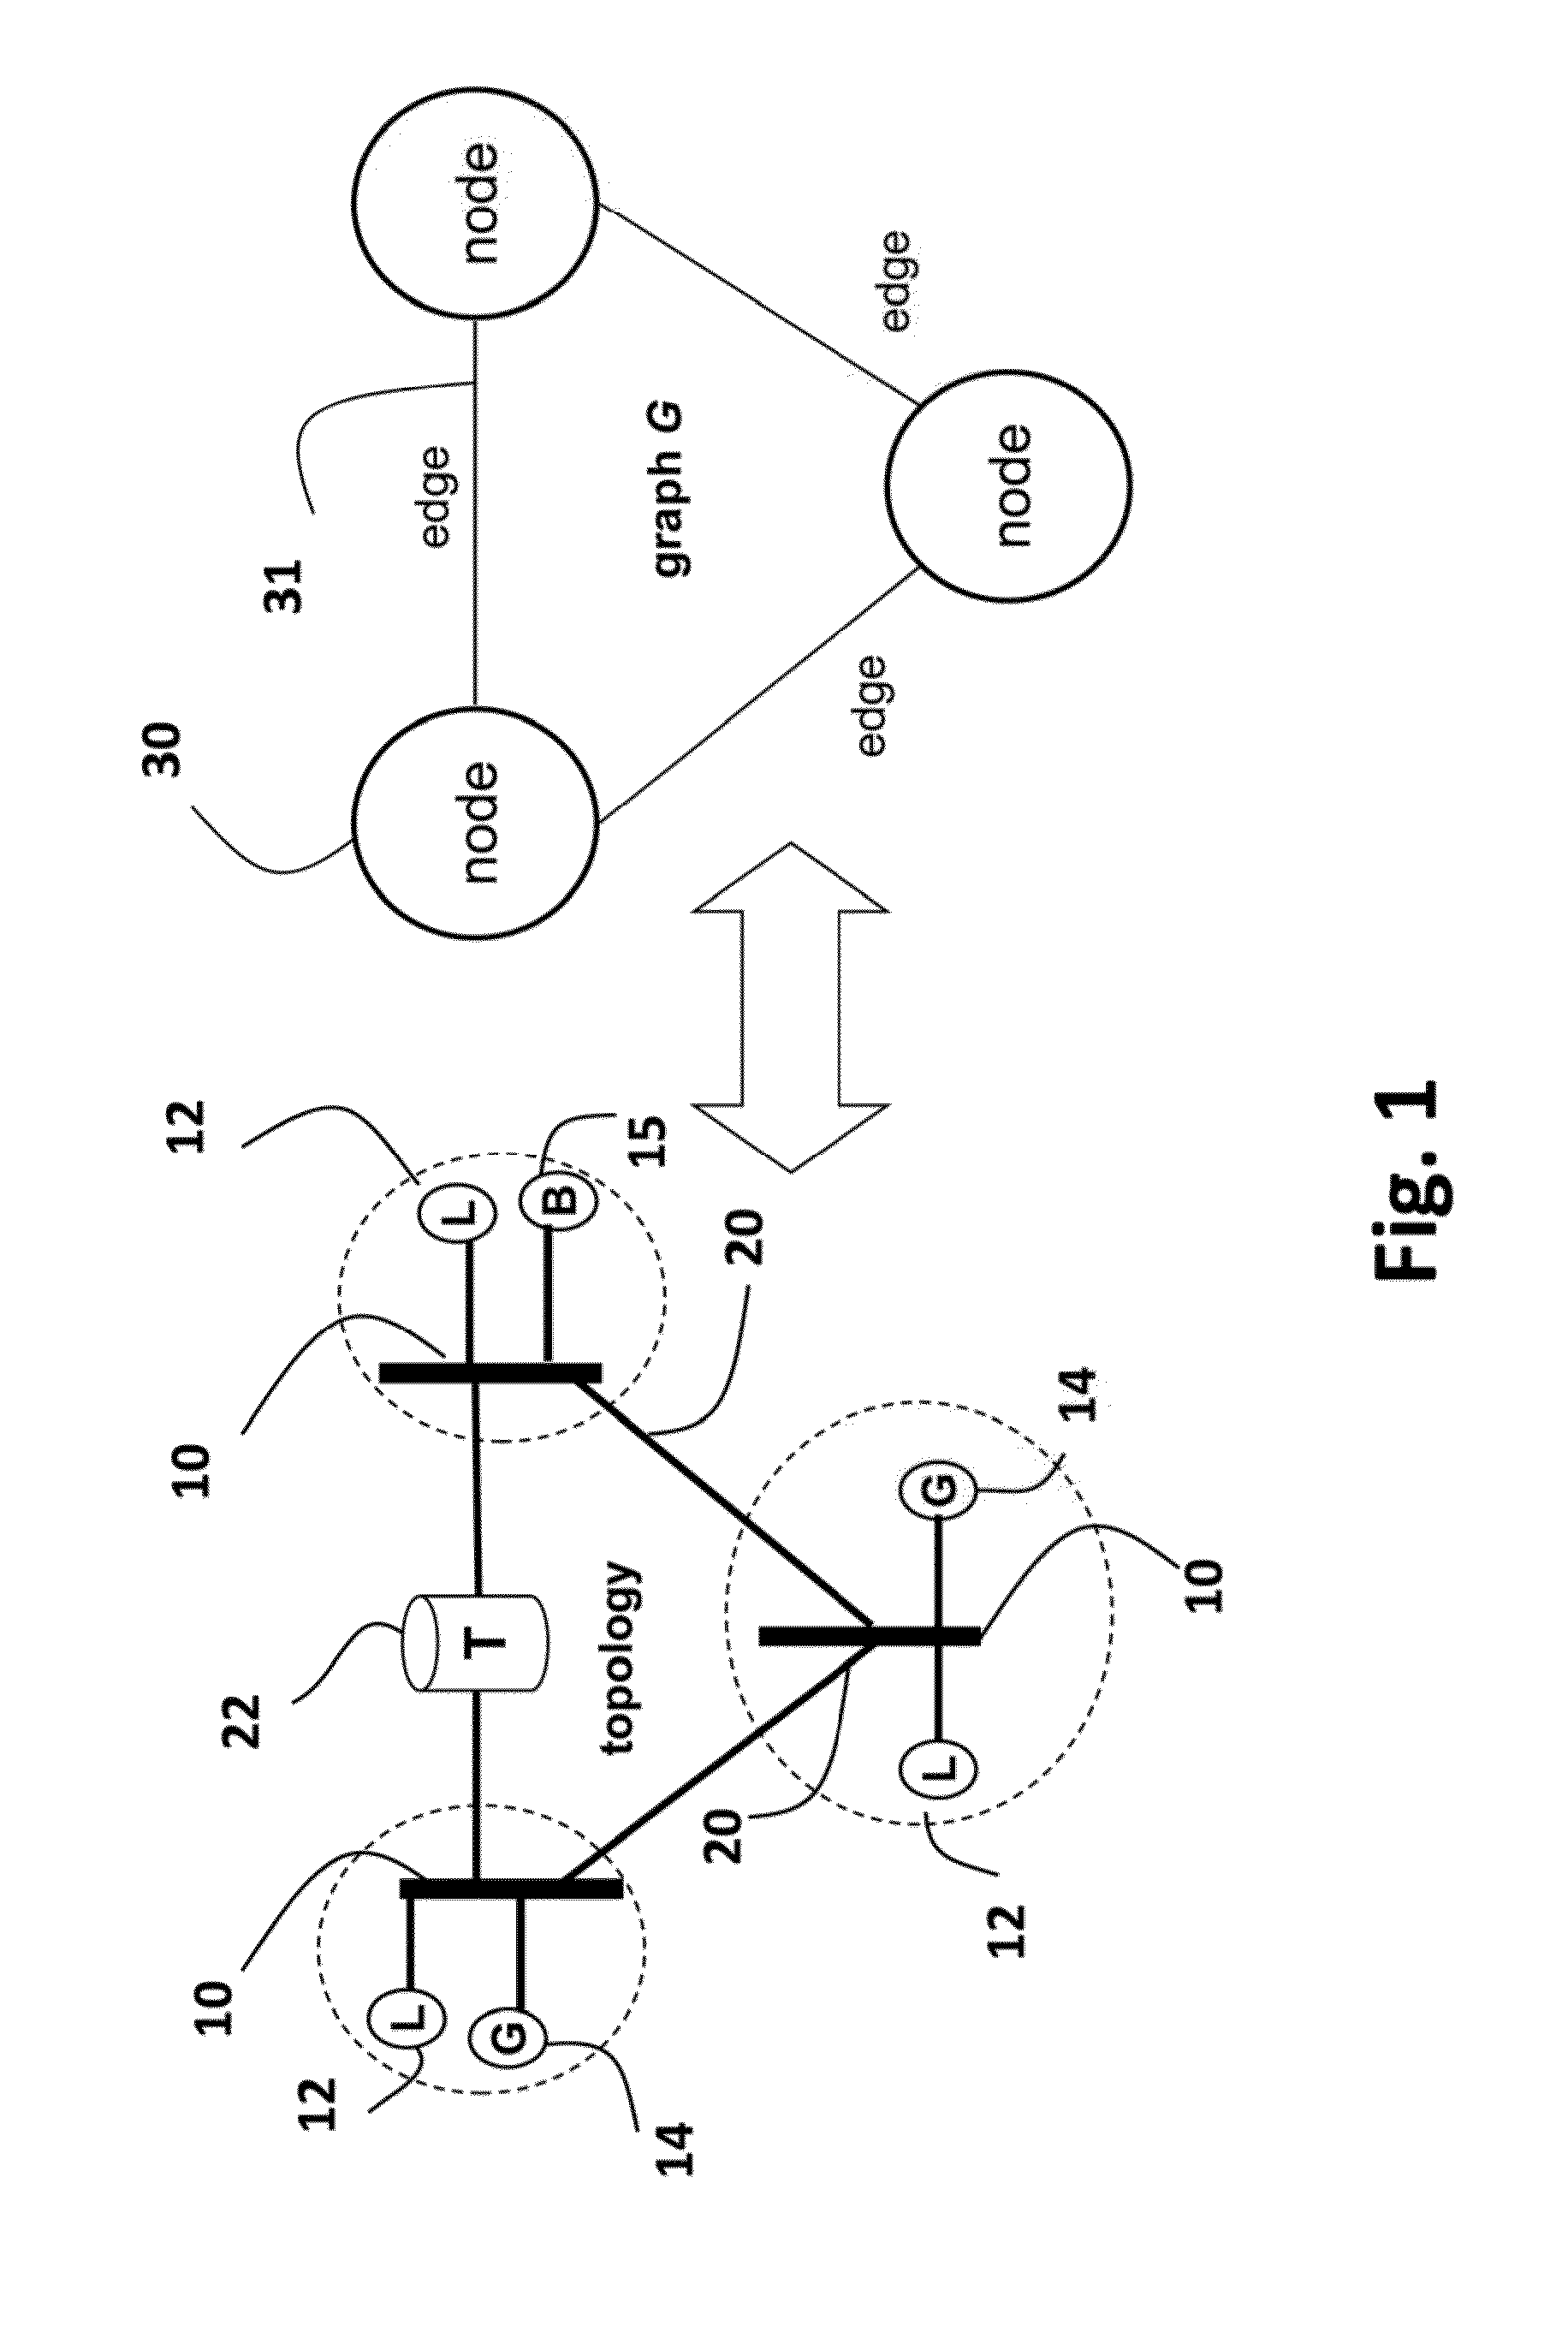 Method for Optimizing Power Flows in Electric Power Networks